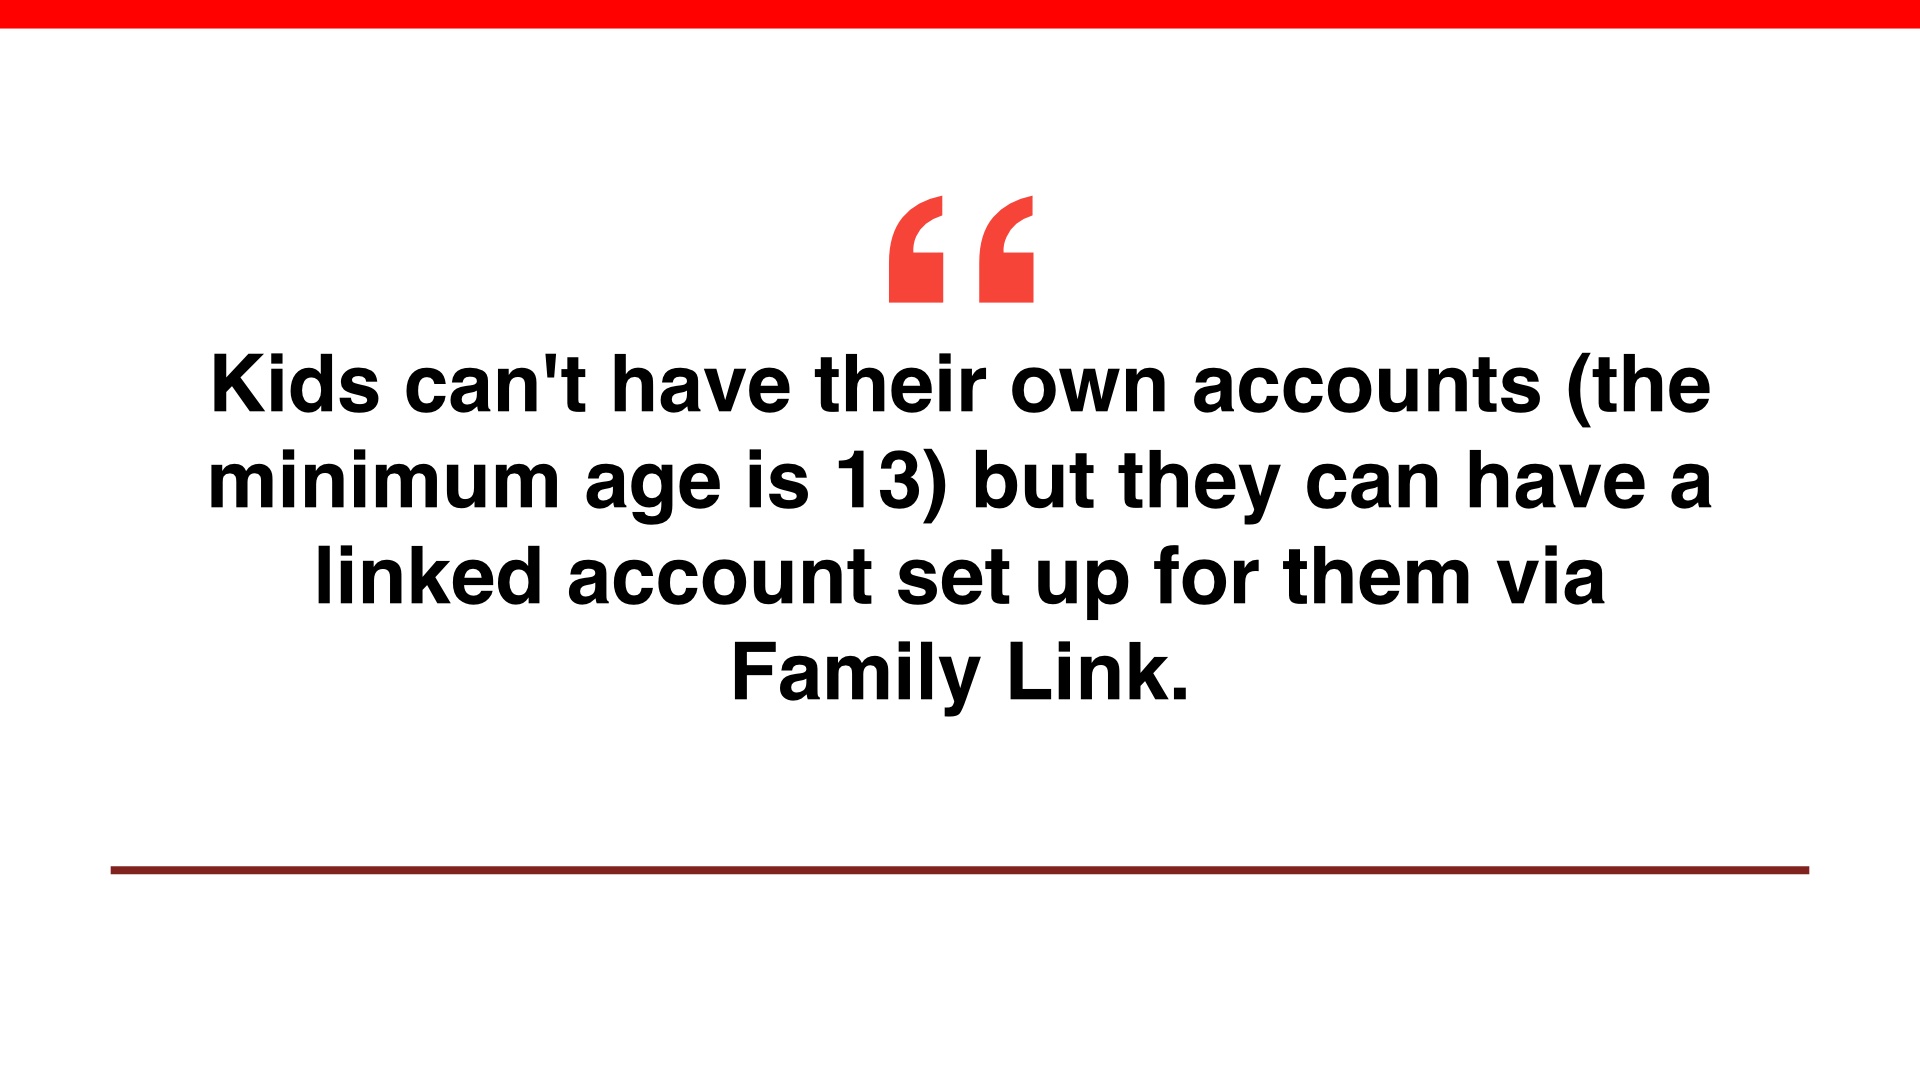 Large quote 'Kids can't have th“eir own accounts (the minimum age is 13) but they can have a linked account set up for them via Family Link.'